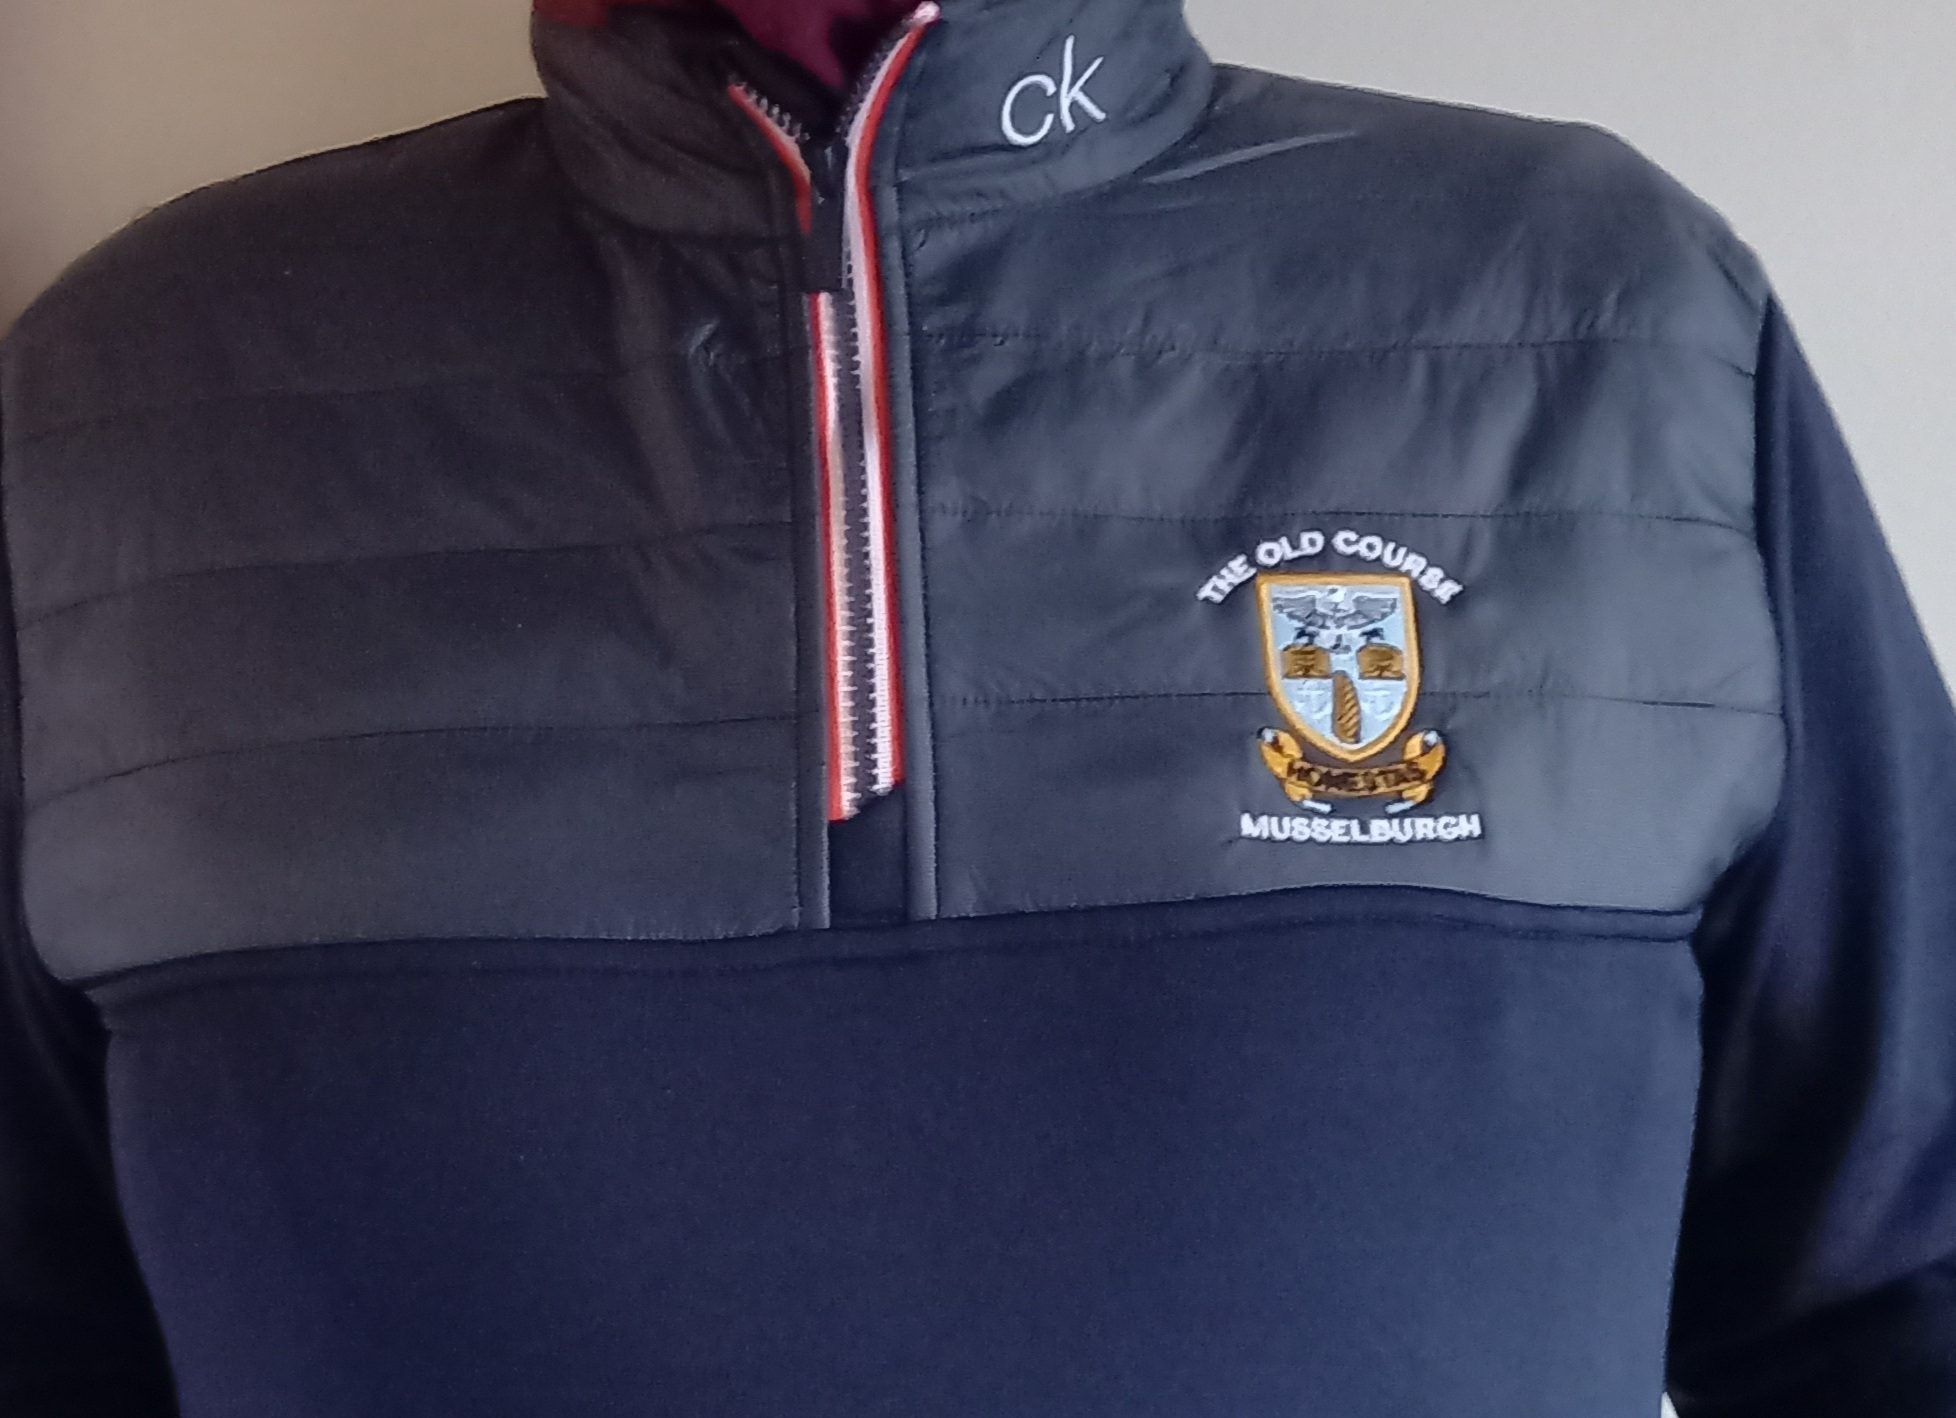 Musselburgh Old Course Golf Club – Crested Merchandise